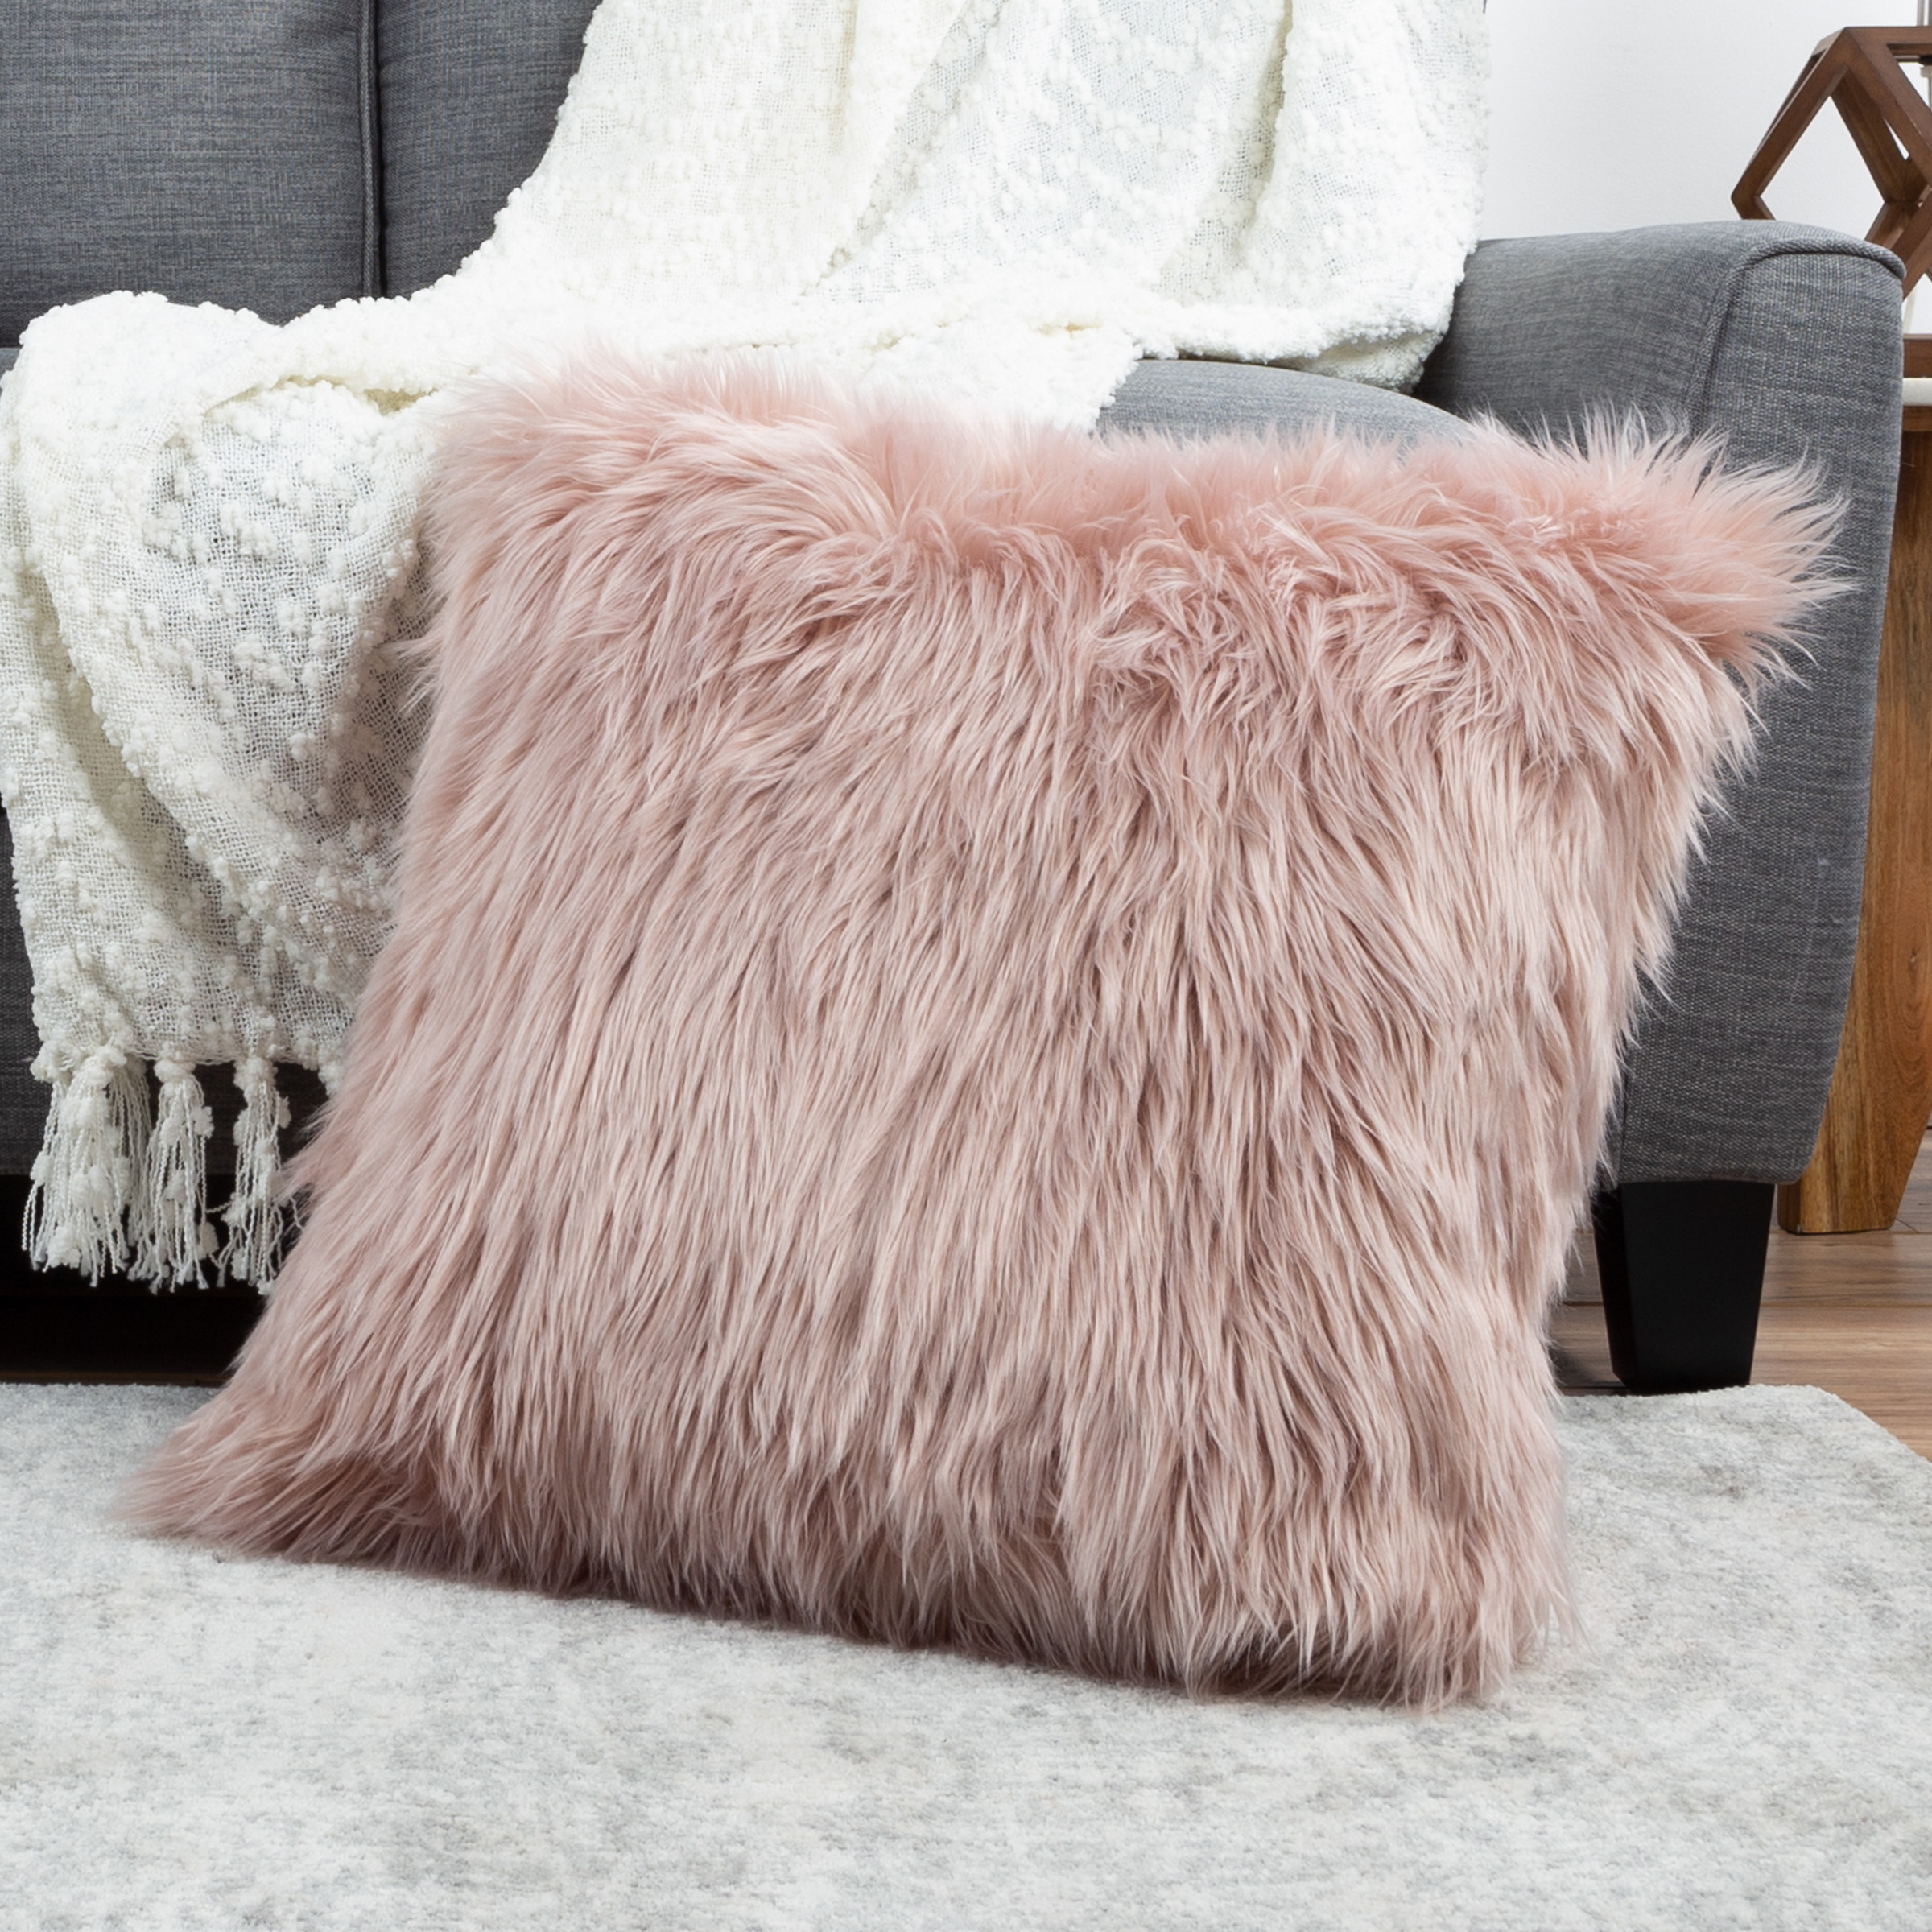 Large Throw Pillow Pink Shag Furry Decor For Couch Or Bed 22 Inches